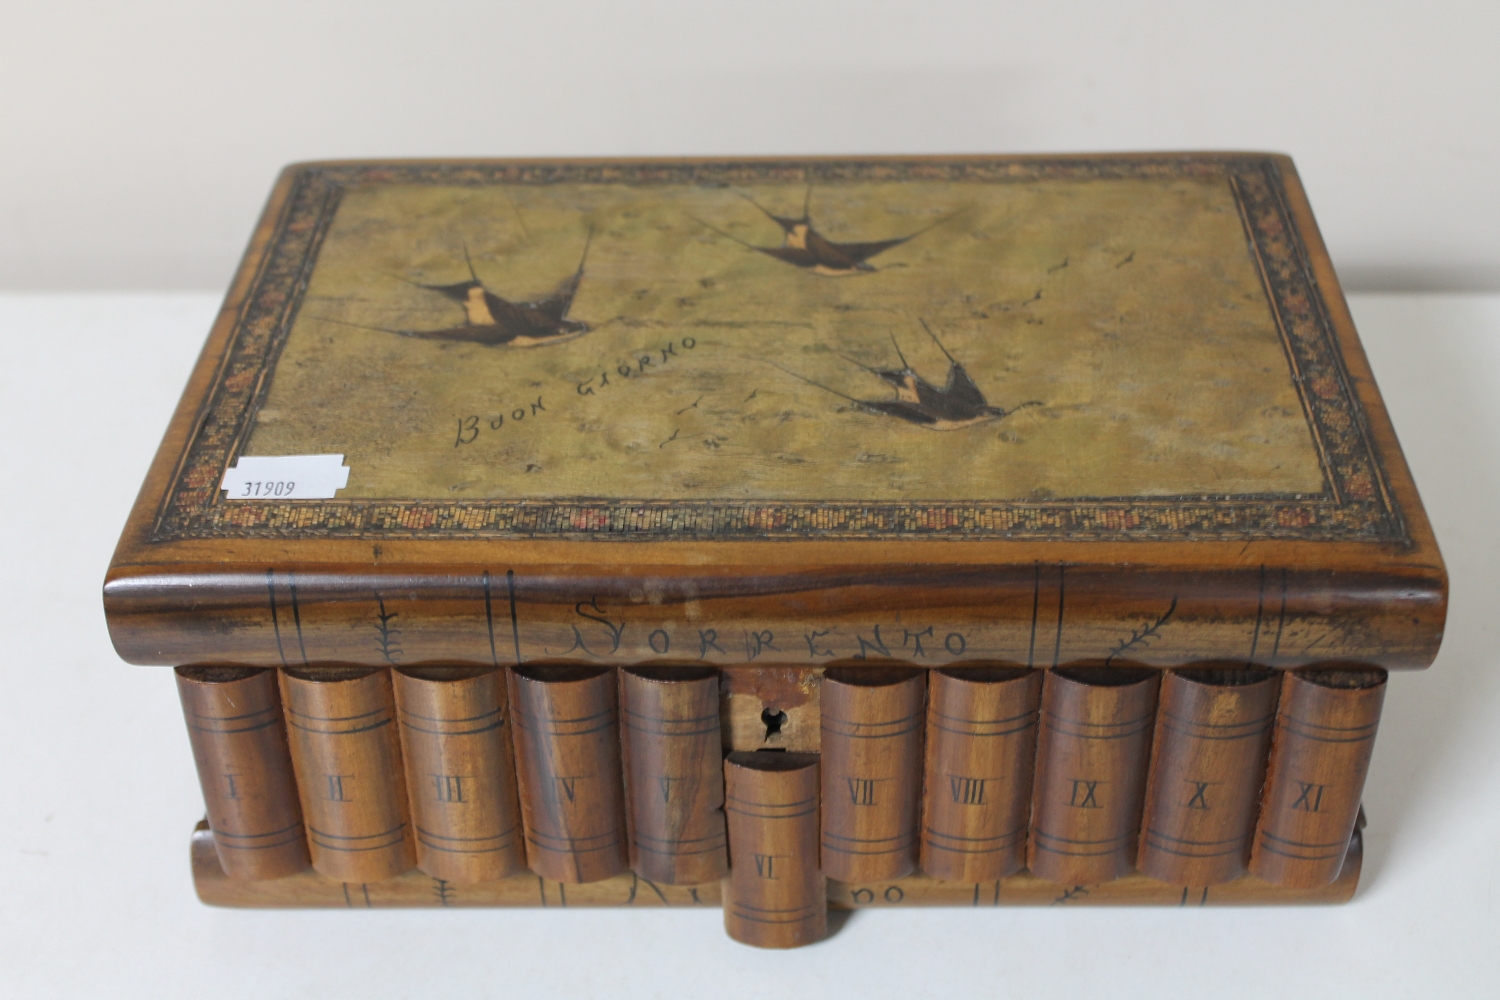 An antique Italian jewellery puzzle box in the form of a book